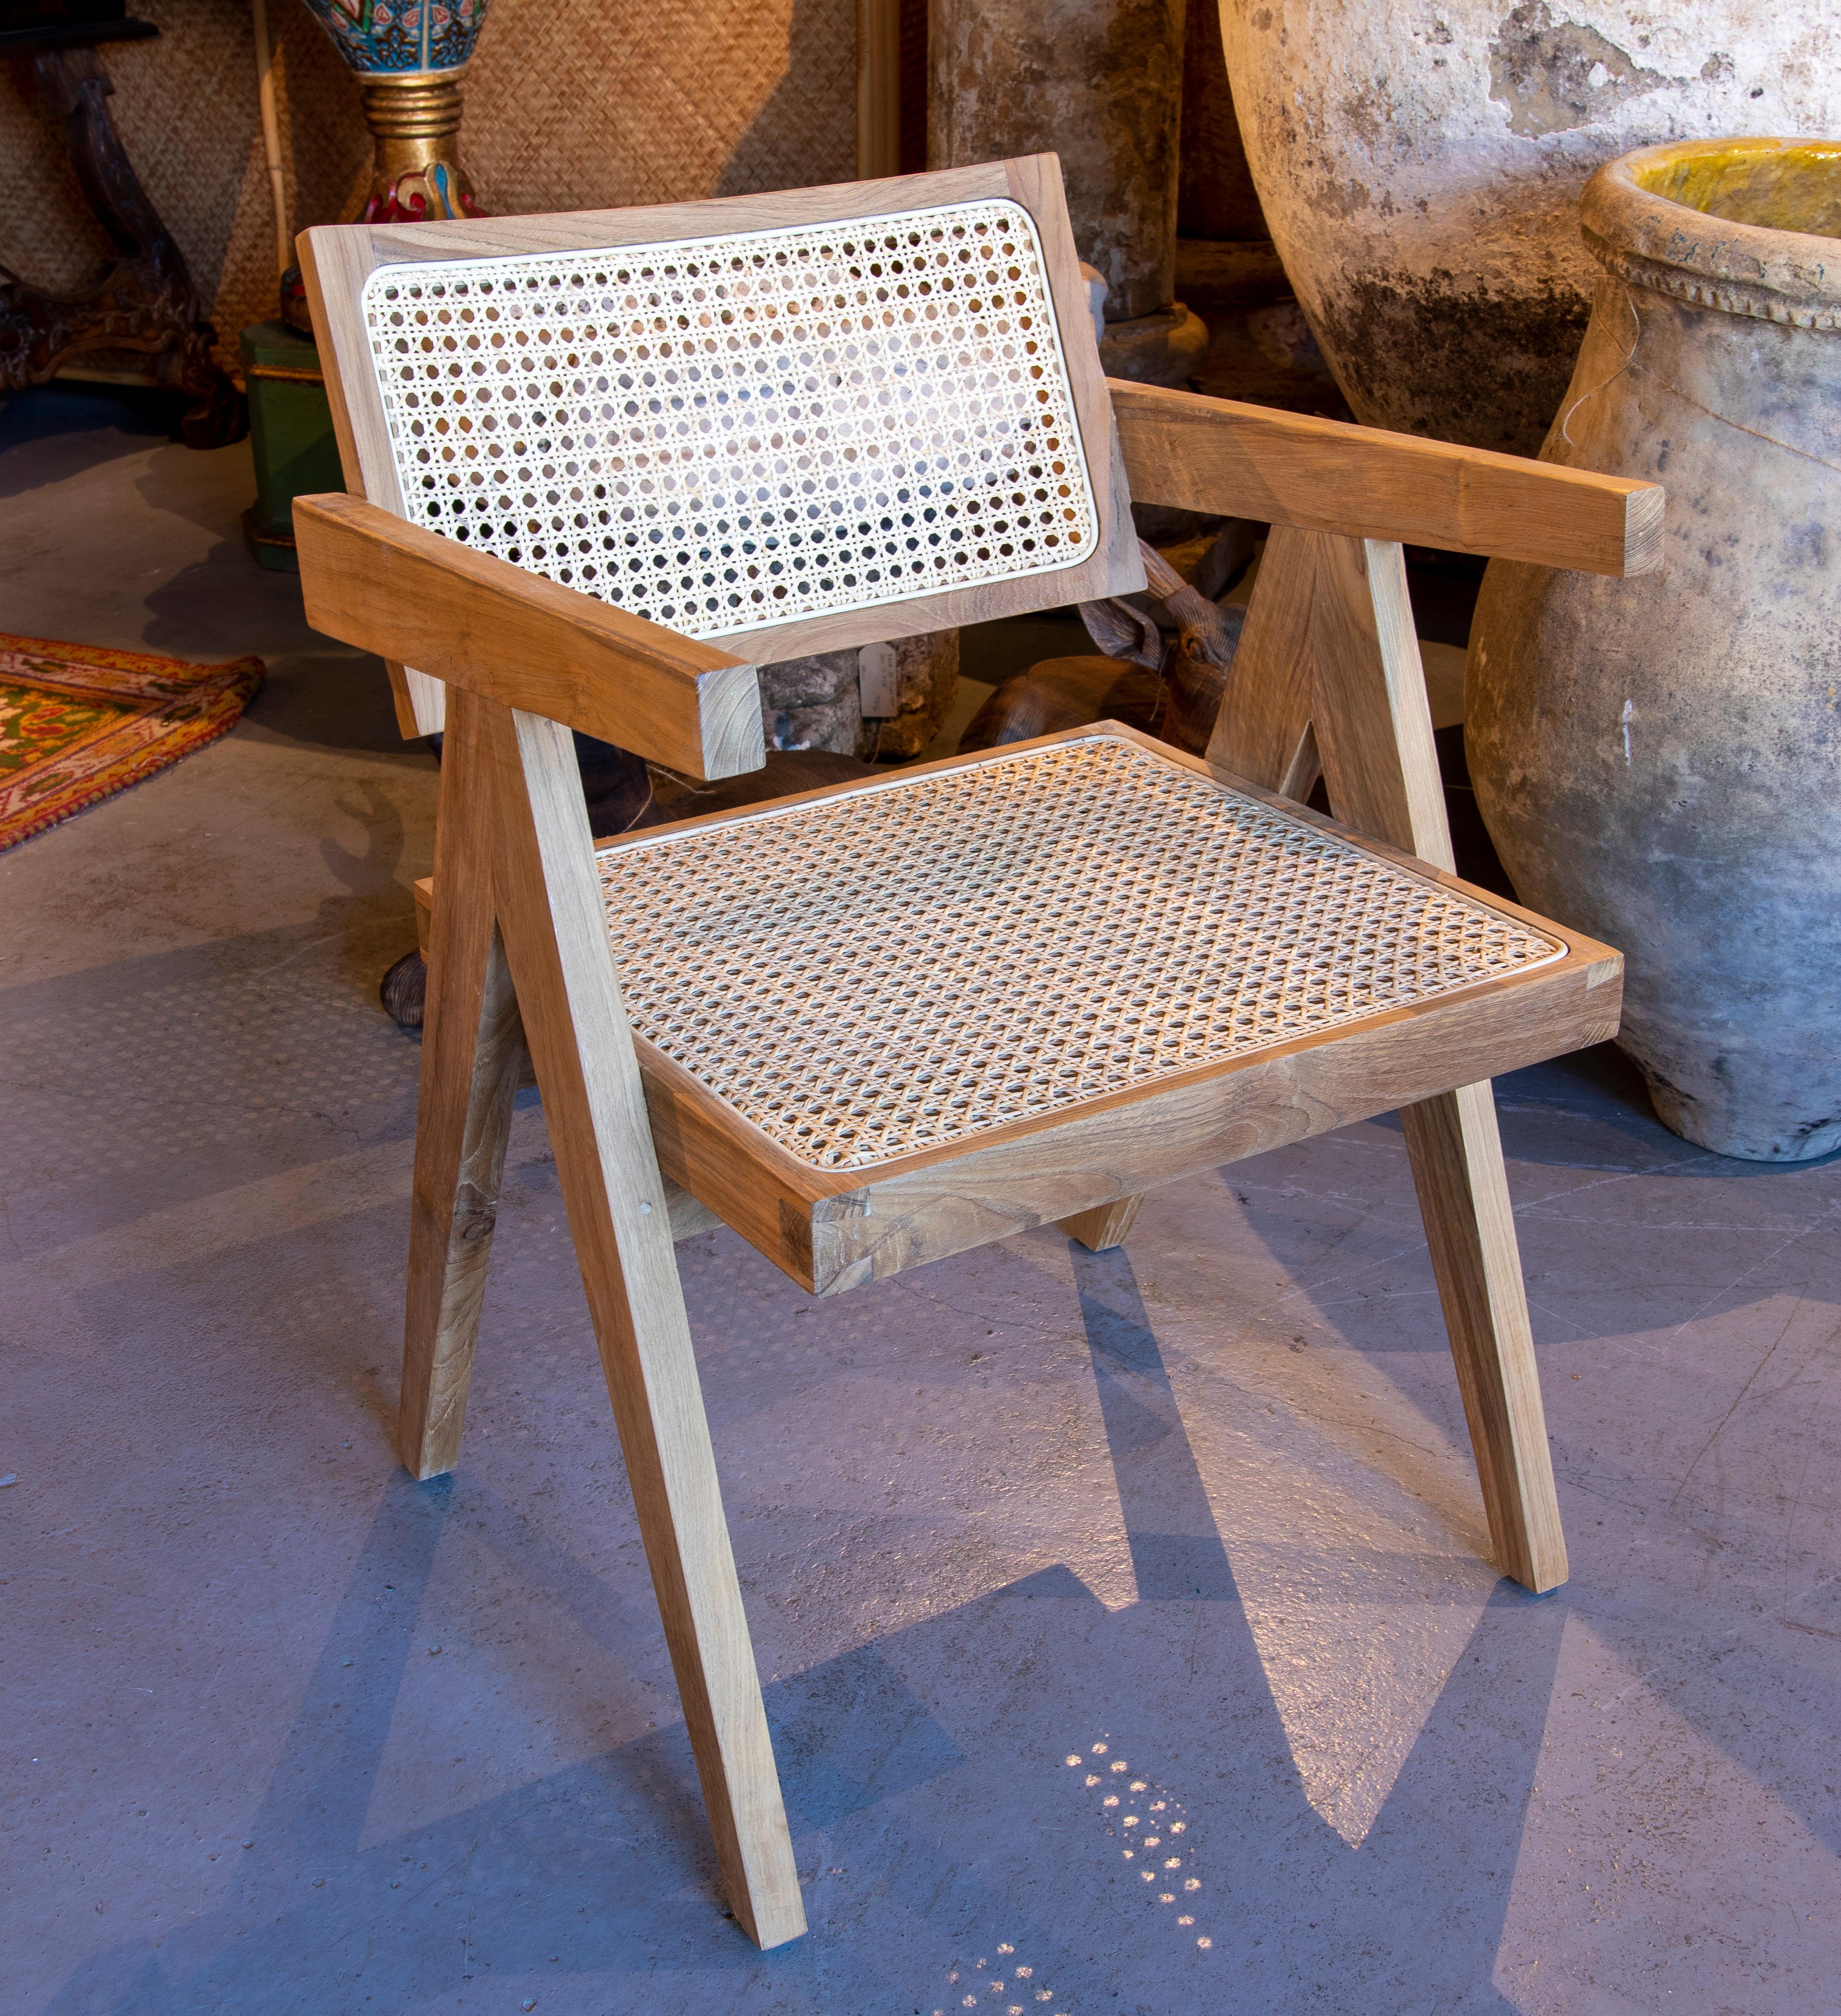 Set of wooden chairs and seat with wicker backrest.